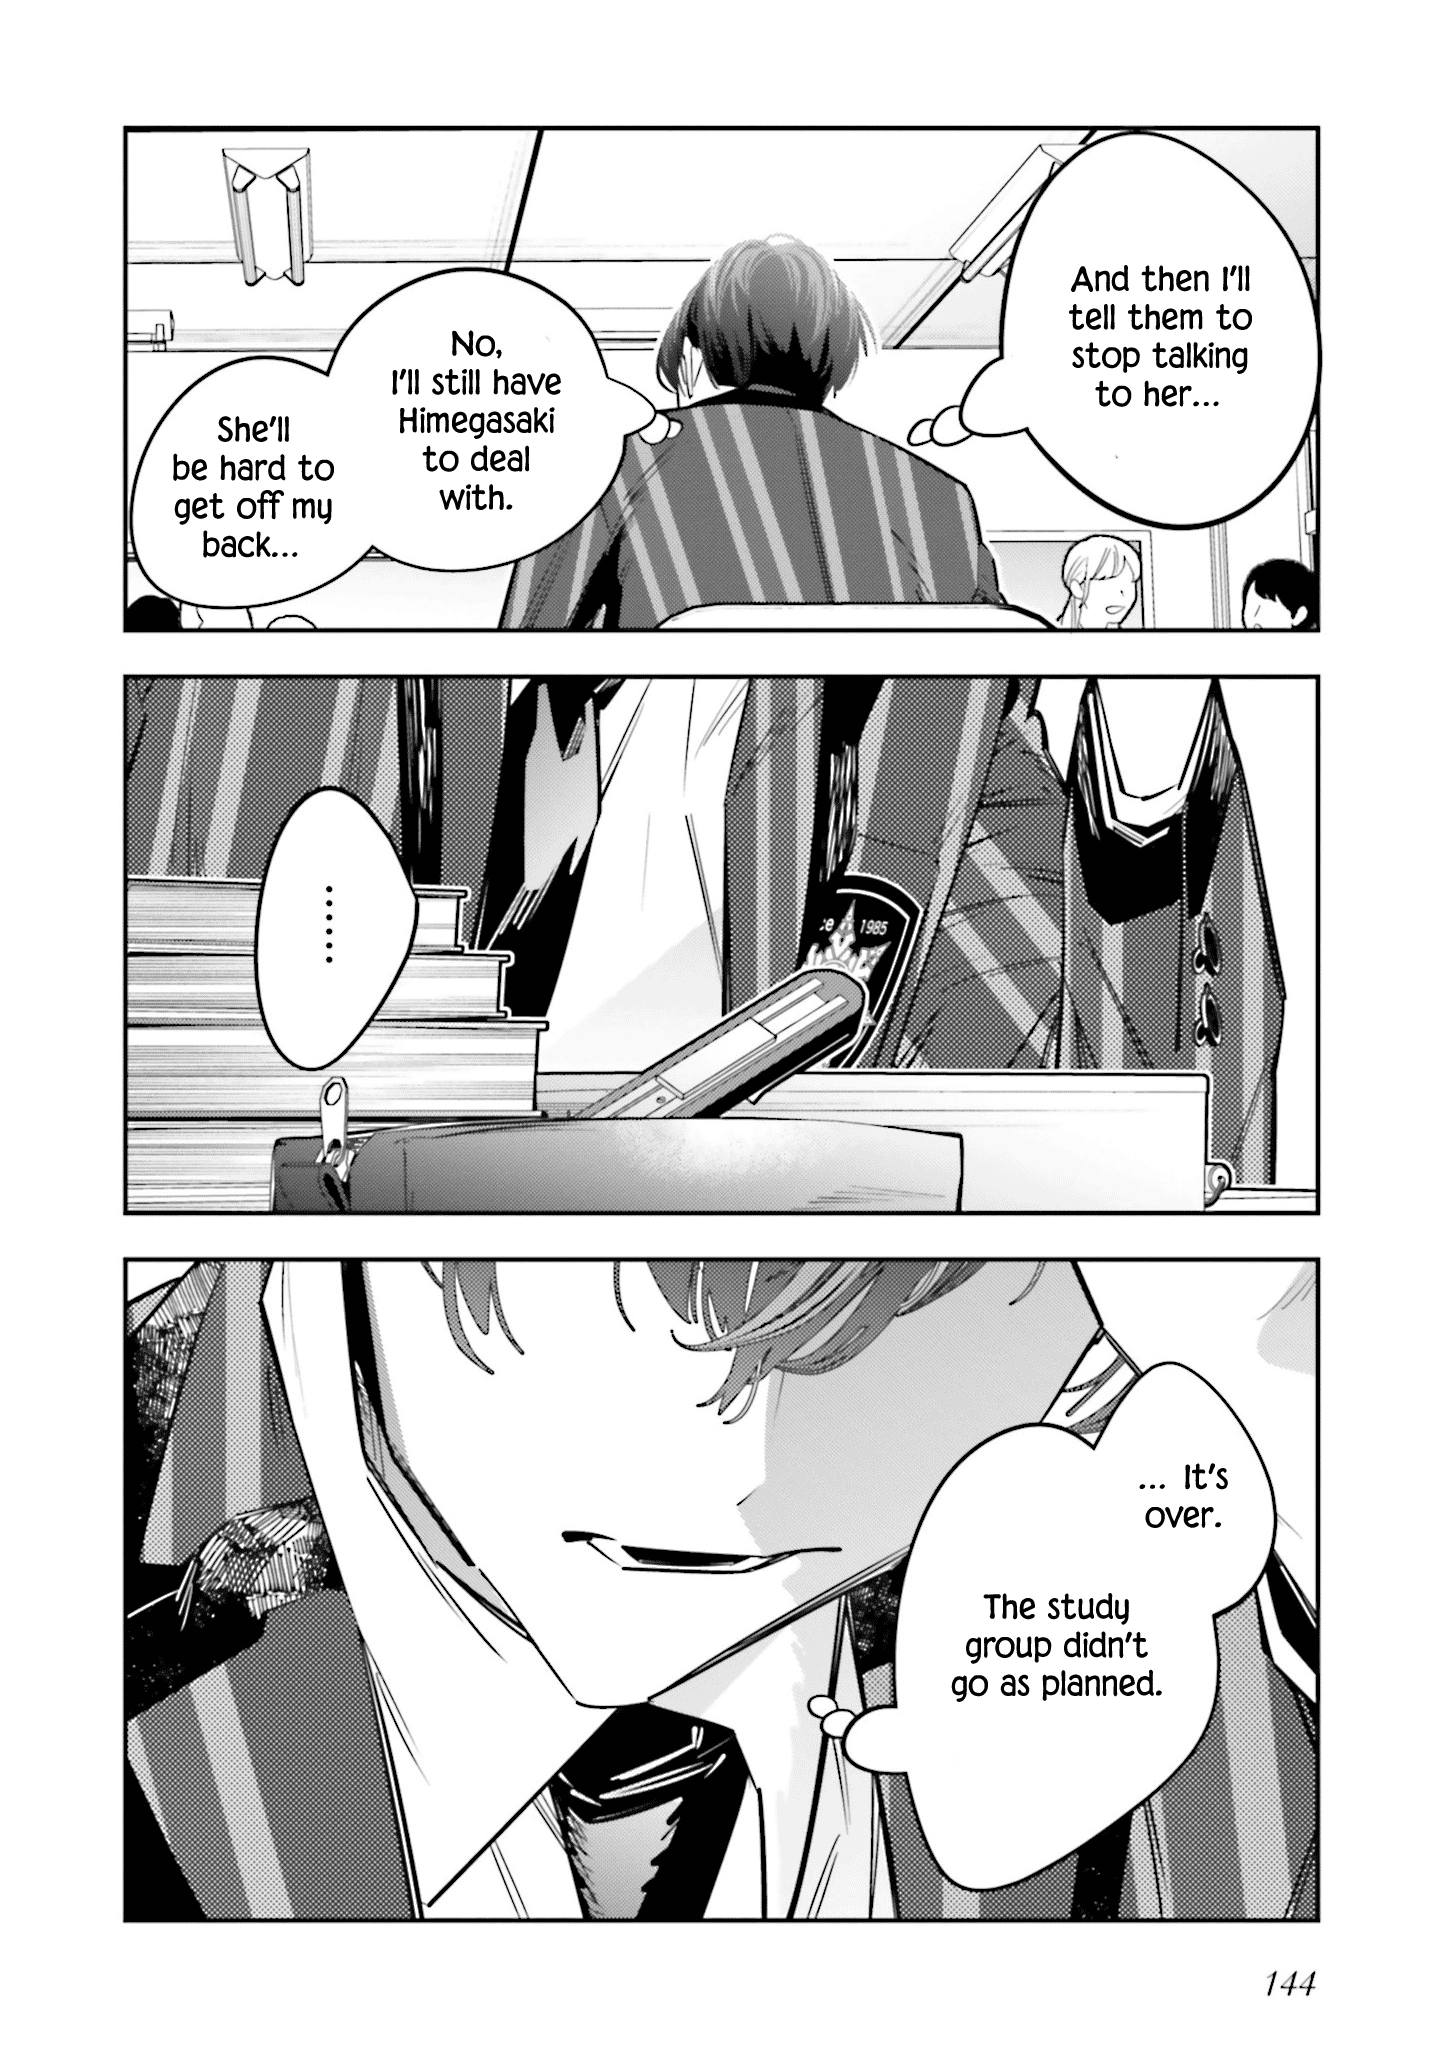 I Reincarnated As The Little Sister Of A Death Game Manga's Murder Mastermind And Failed Chapter 9 #26